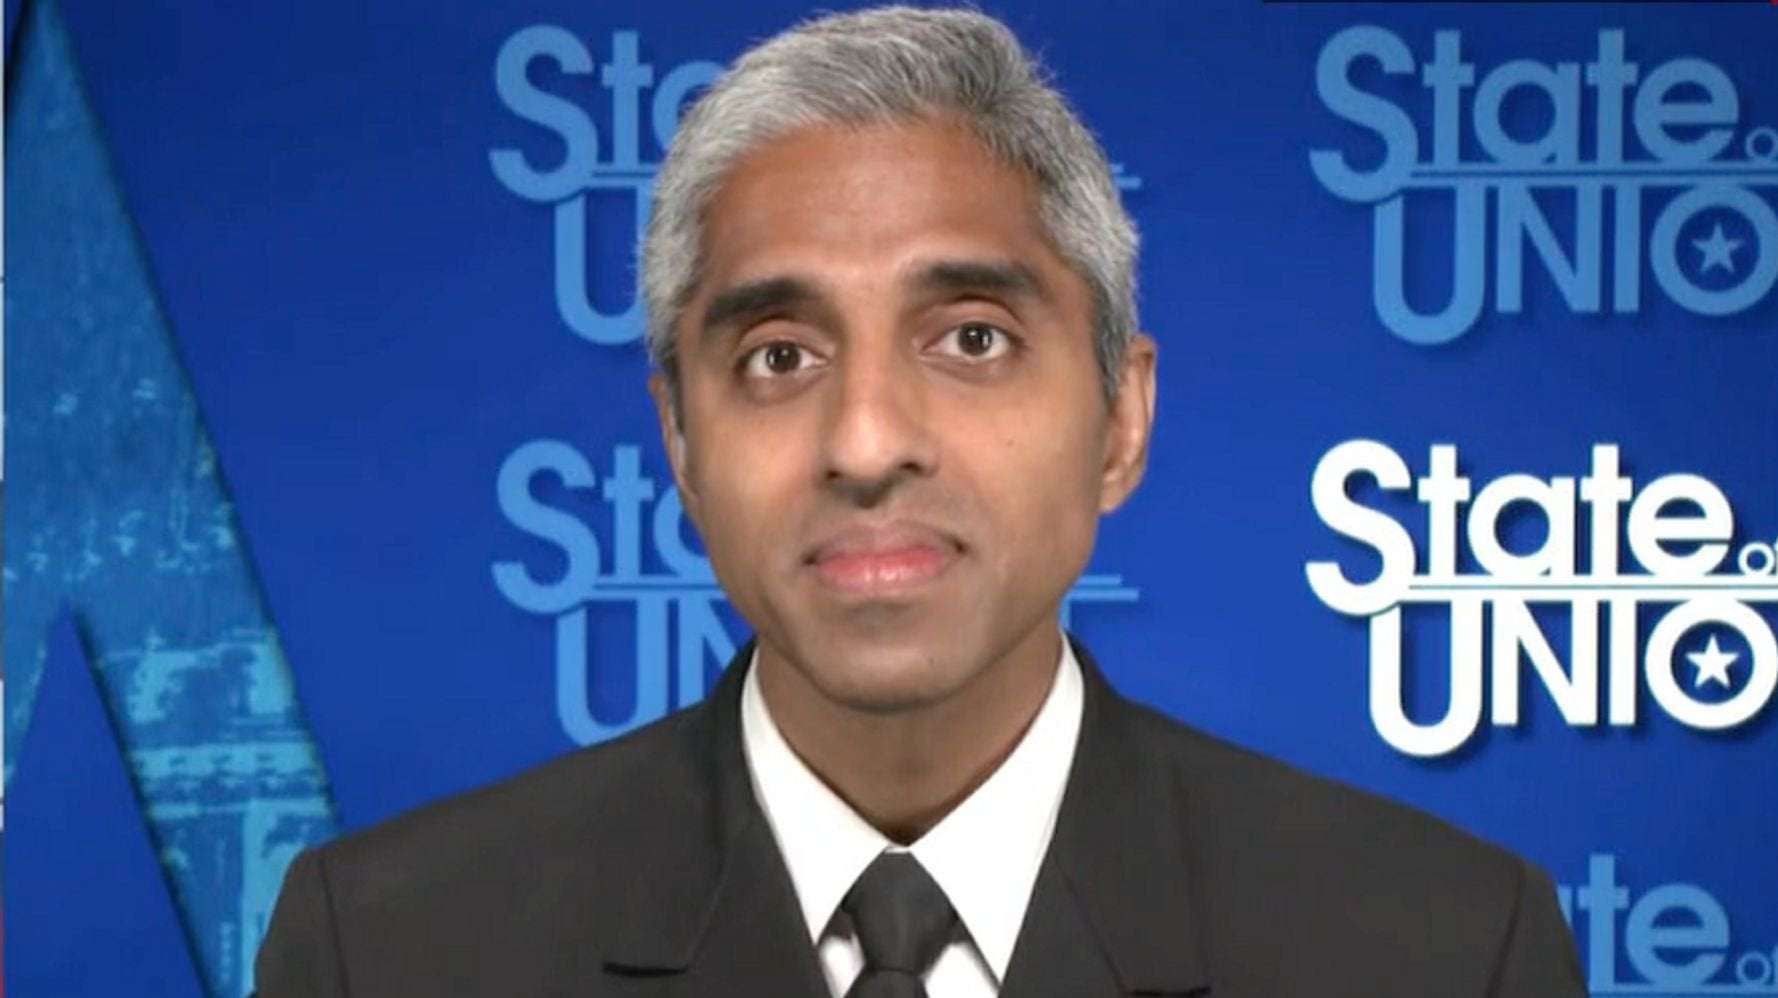 image for Surgeon General: There's No Value In Locking Up People For Marijuana Use